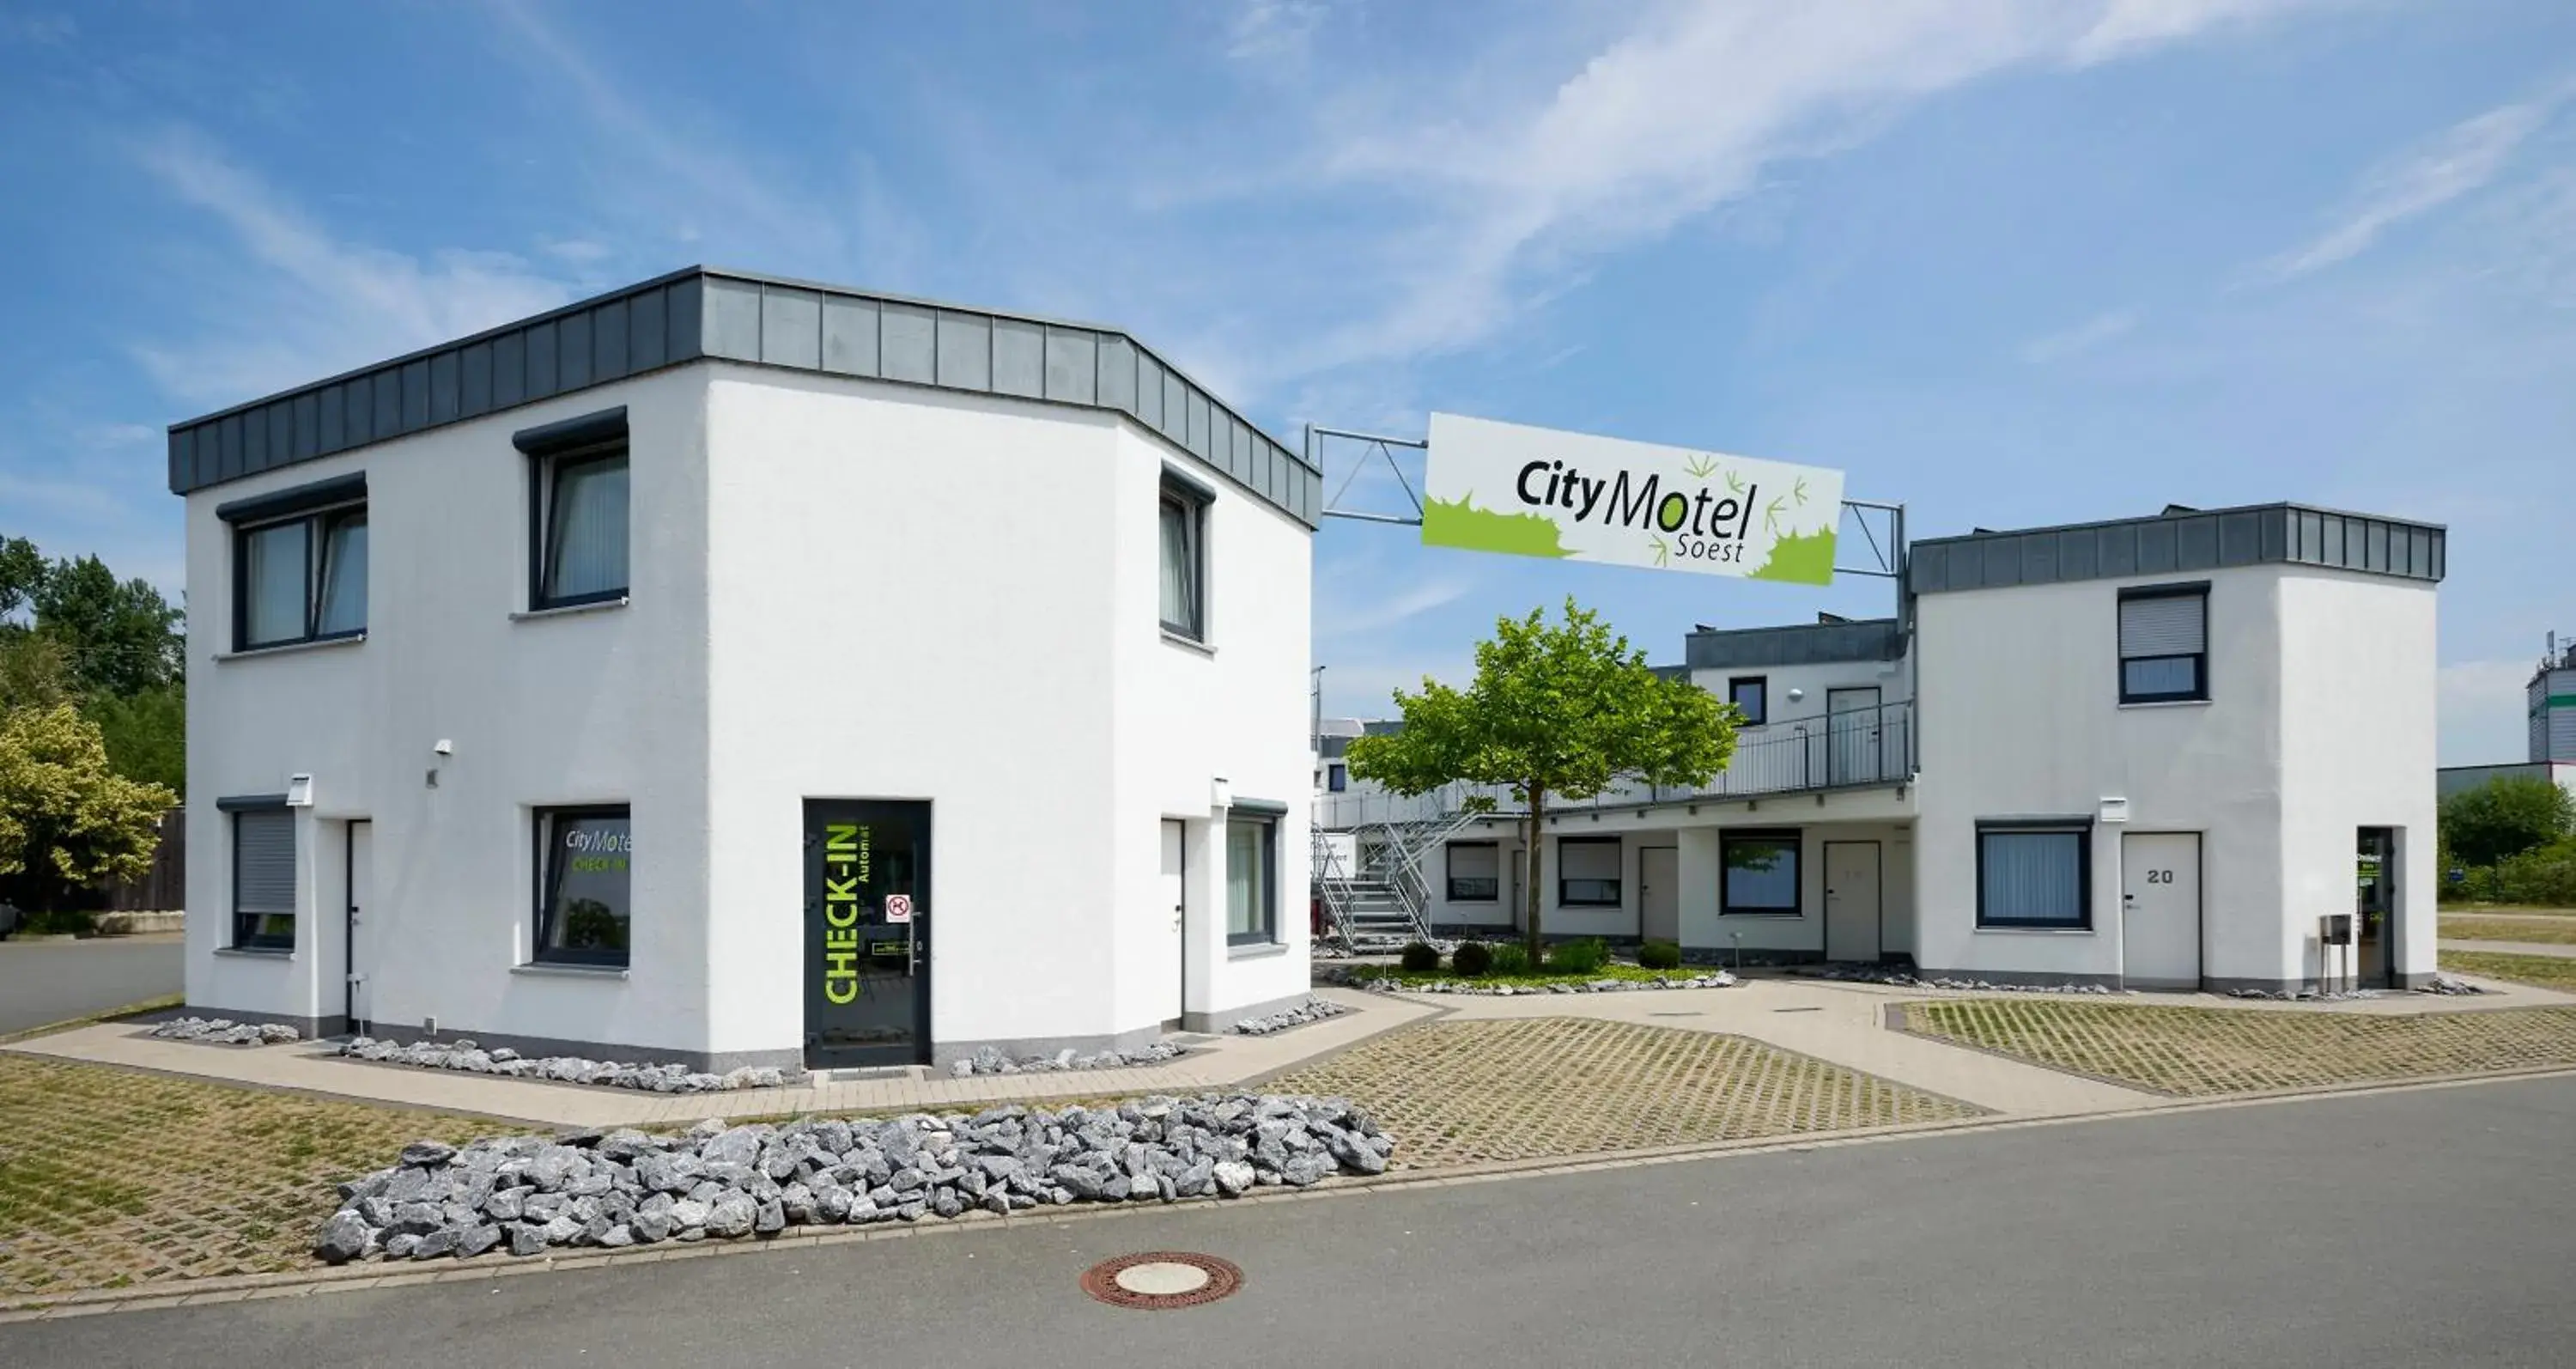 Property building in City Motel Soest